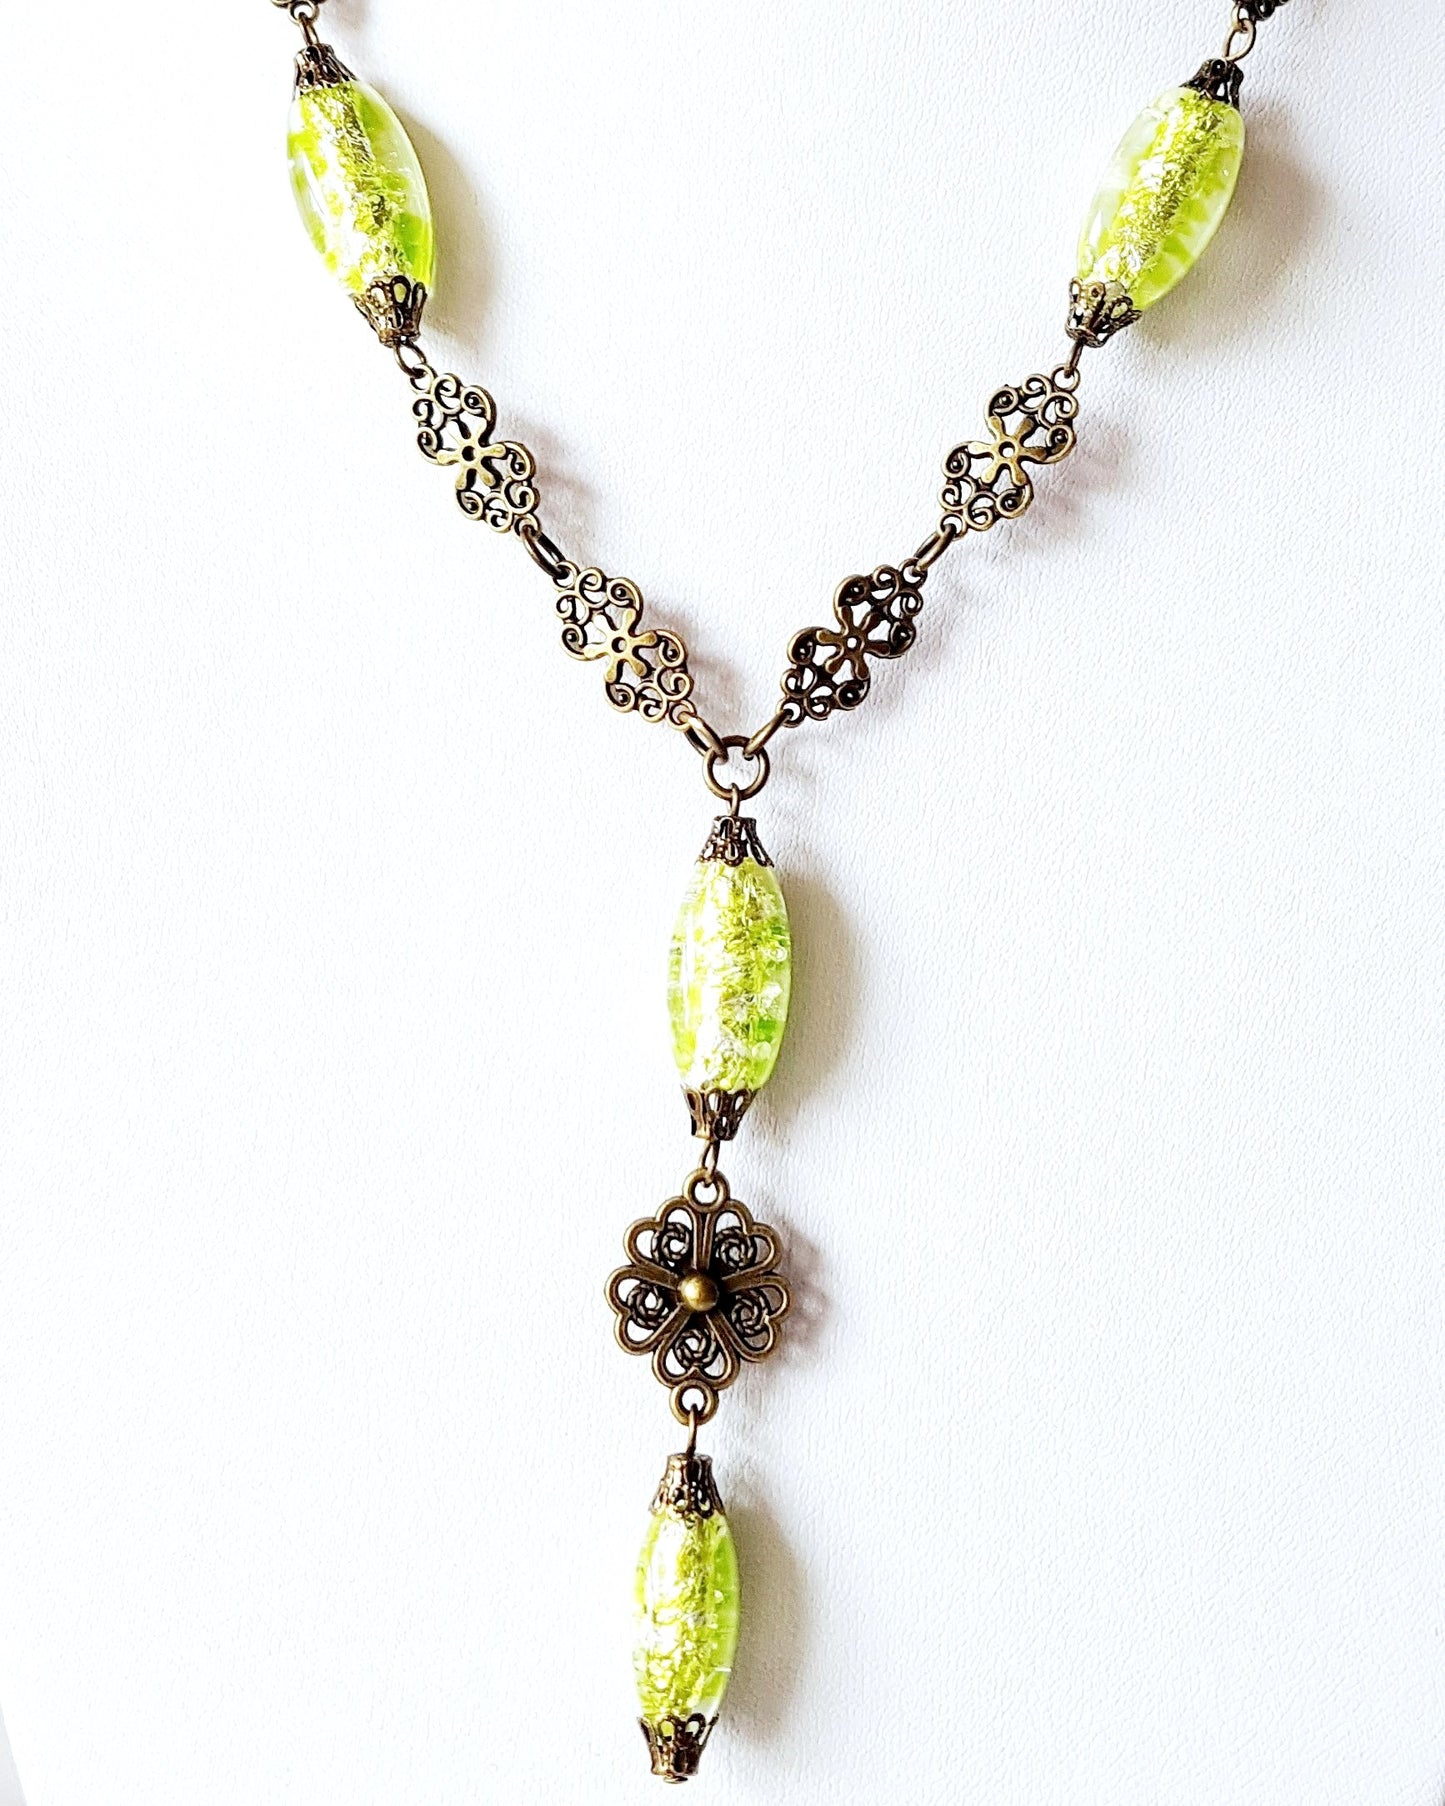    Lime Green Art Deco Fire Necklace-OOAK-Y Style Necklace-Vintage Foil Glass Beads-Antiqued Brass